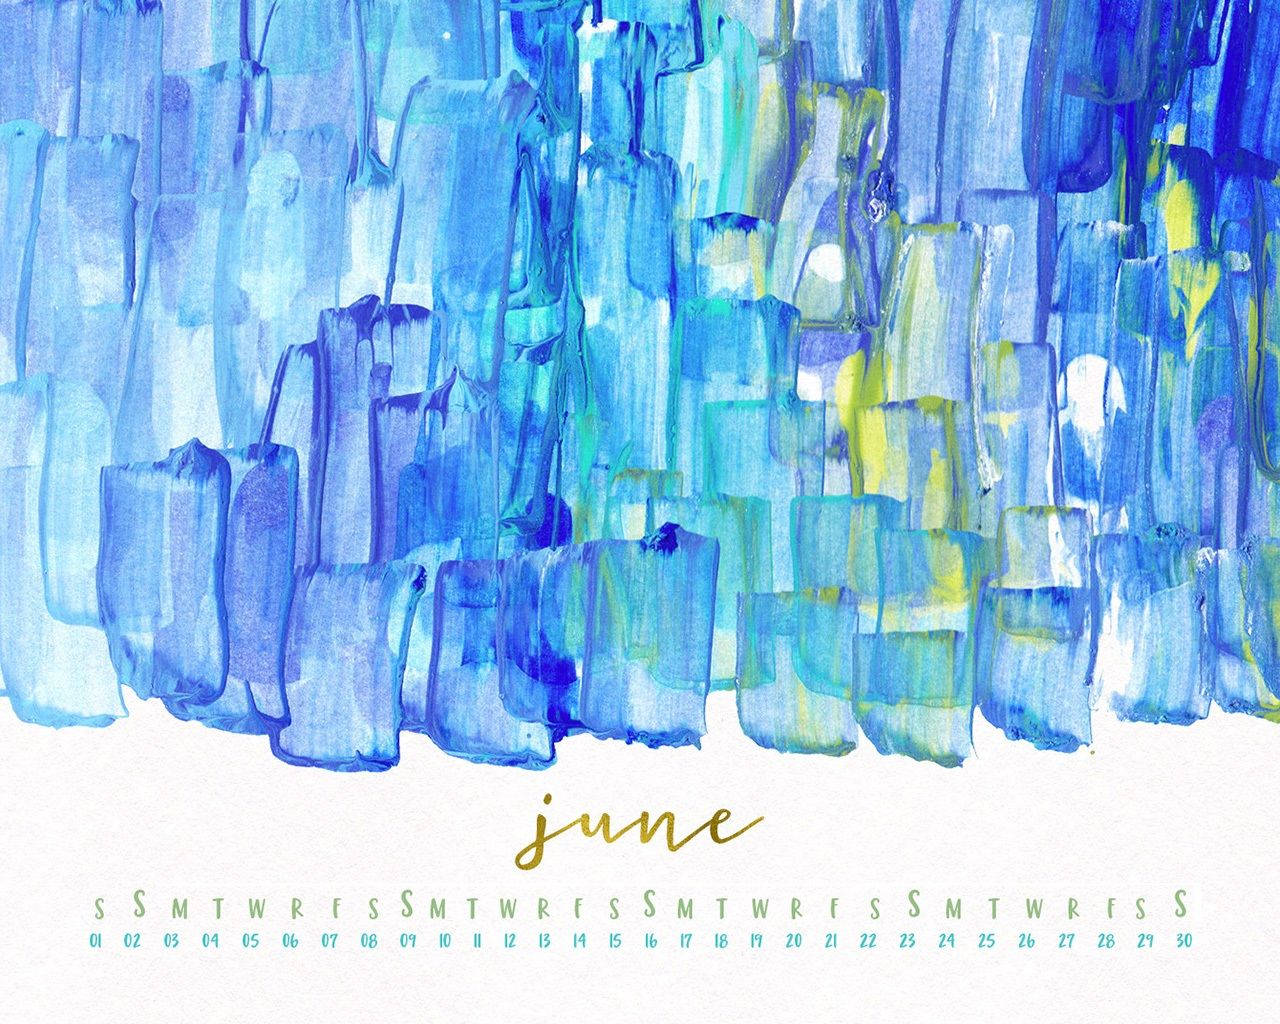 June 2018 - A Blue Painting Of Reflection And Introspection Background